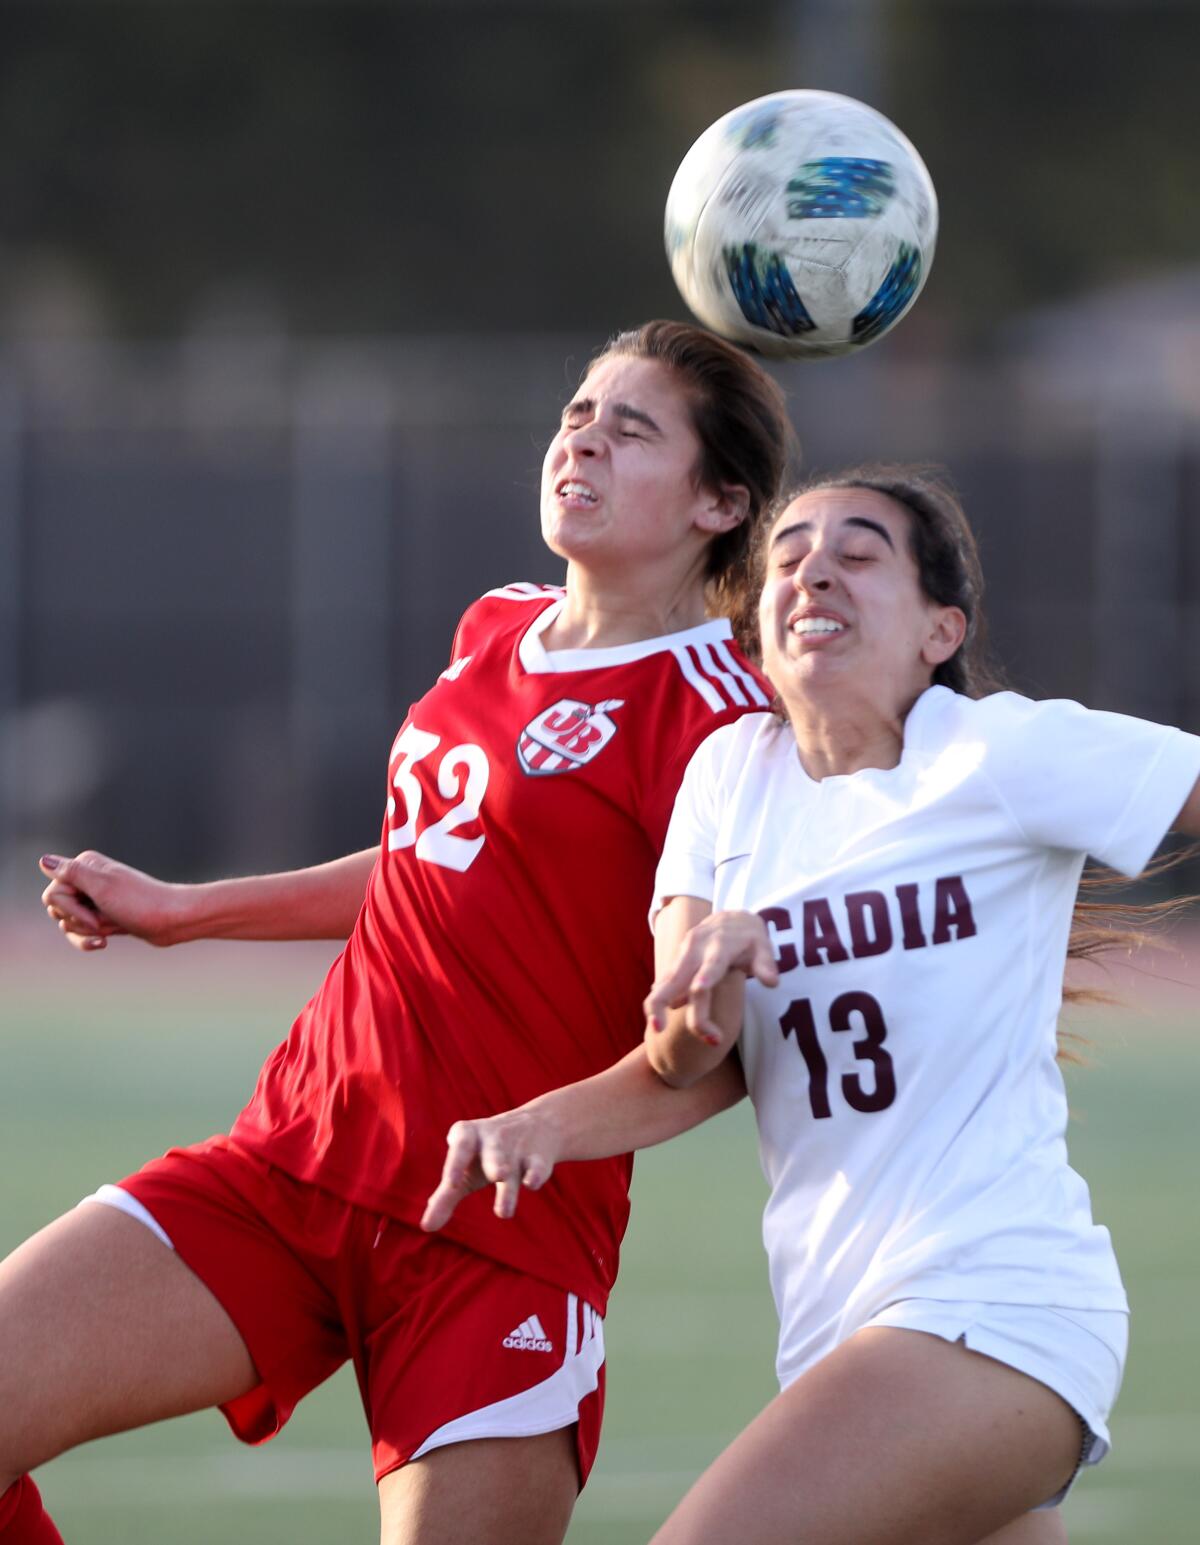 Burbank girls soccer player Jessie Virtue, left, battles for the ball in game vs. Arcadia, at home in Burbank on Tuesday, Jan. 7, 2020.